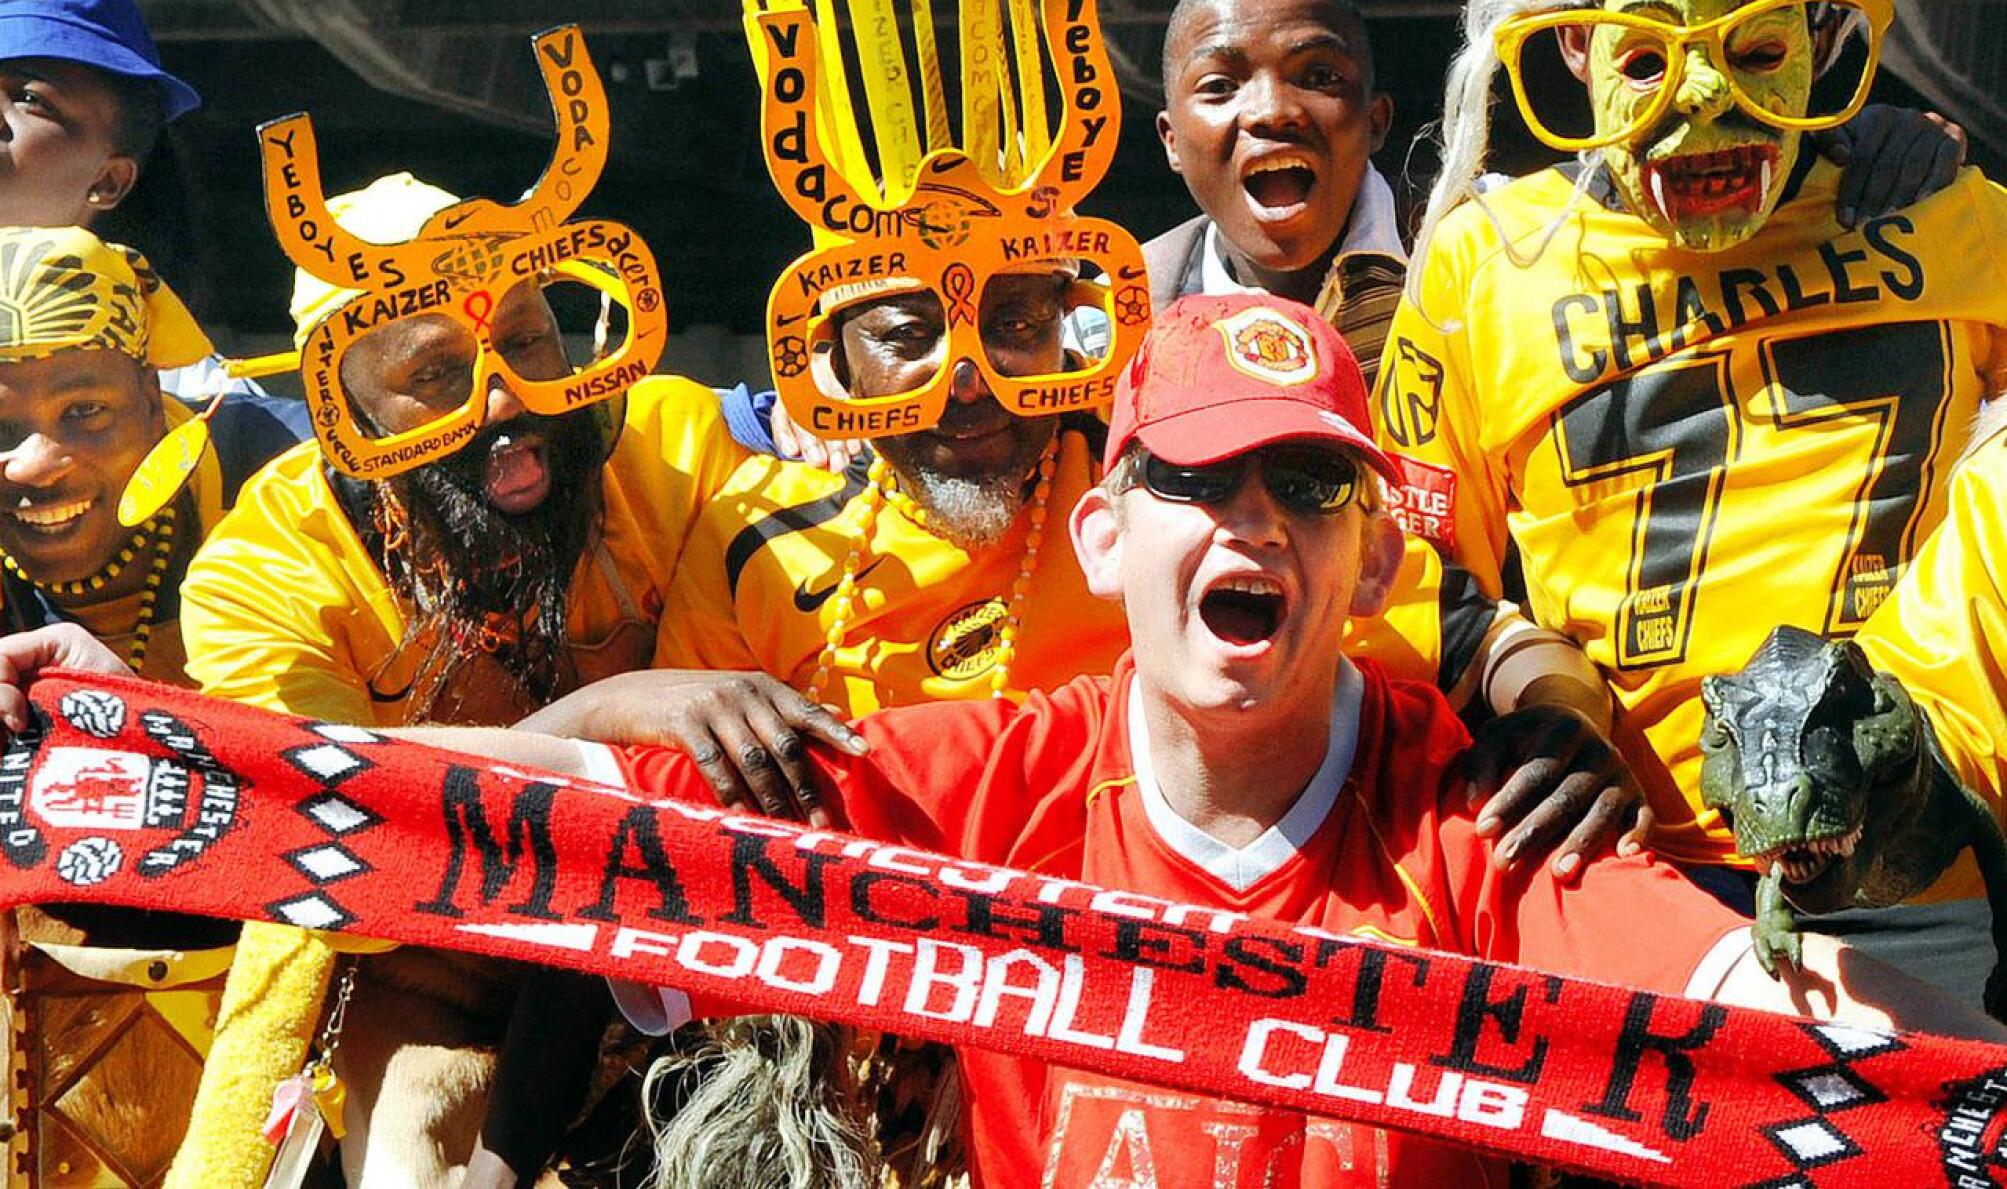 Kaizer Chiefs and Manchester United fans at Newlands Stadium in Cape Town